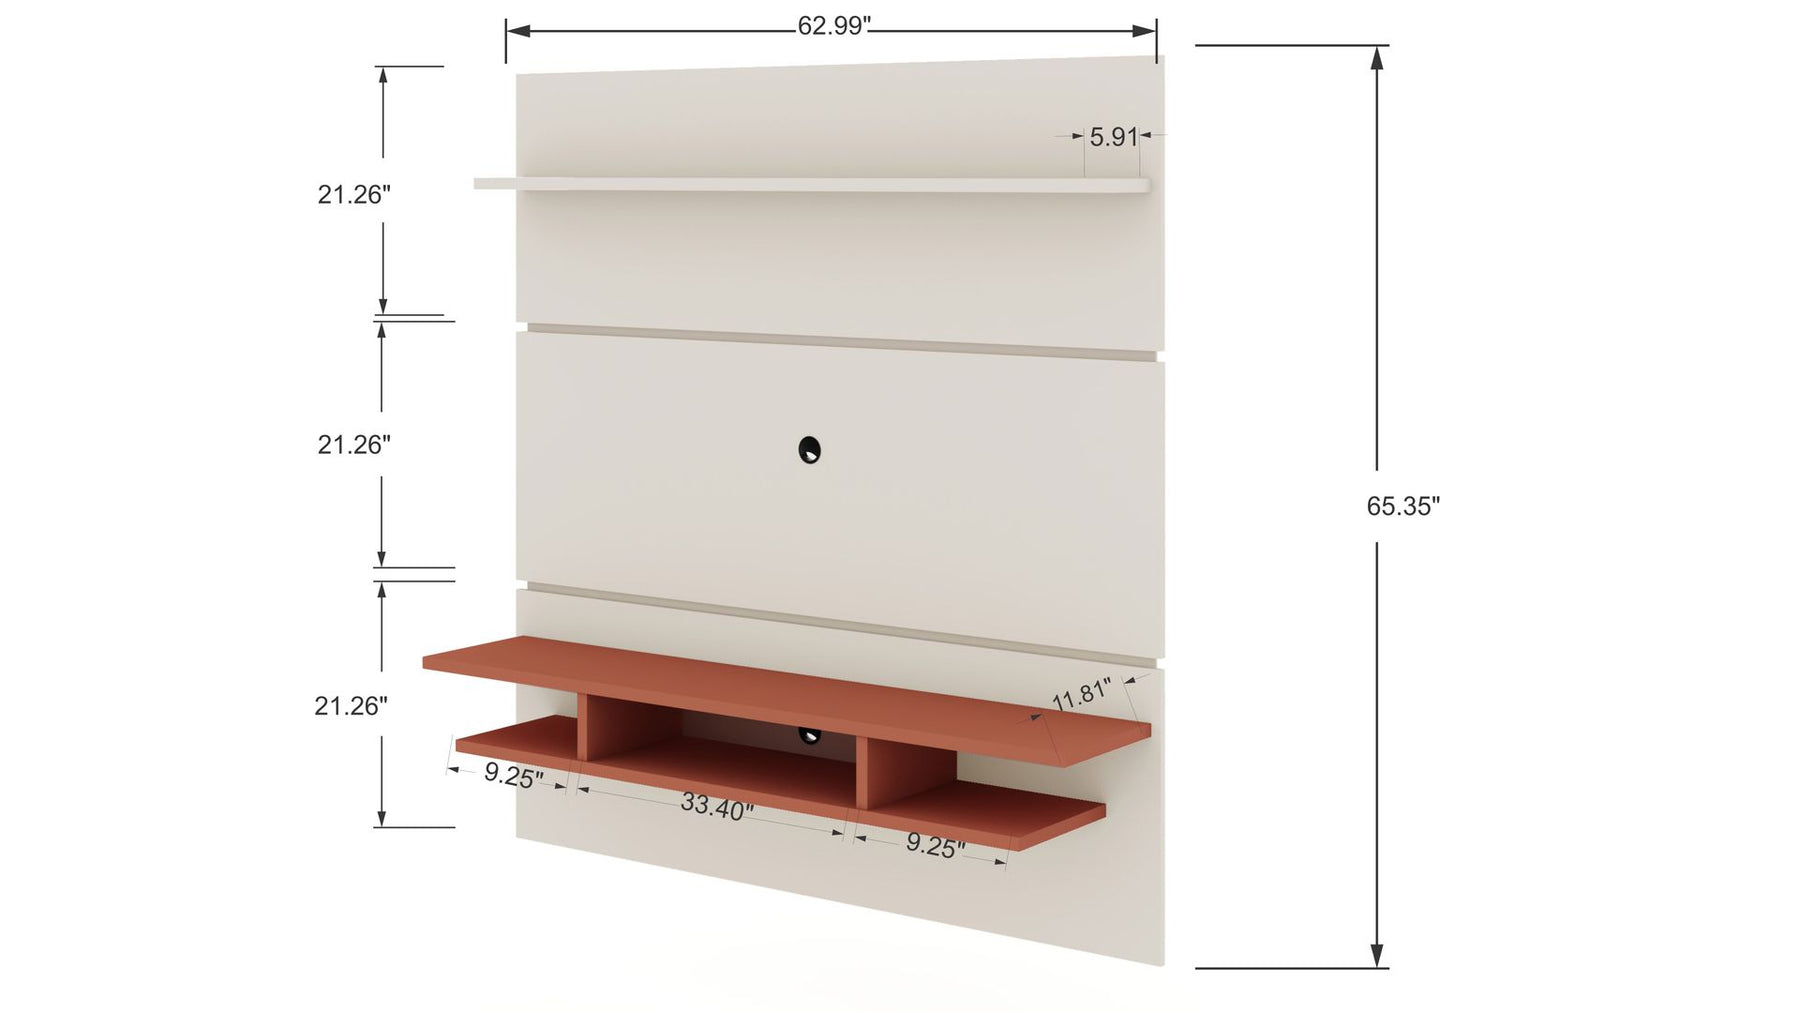 Manhattan Comfort Tribeca 62.99 Mid-Century Modern Floating Entertainment Center with Décor Shelves in Off White and Terra Orange Pink